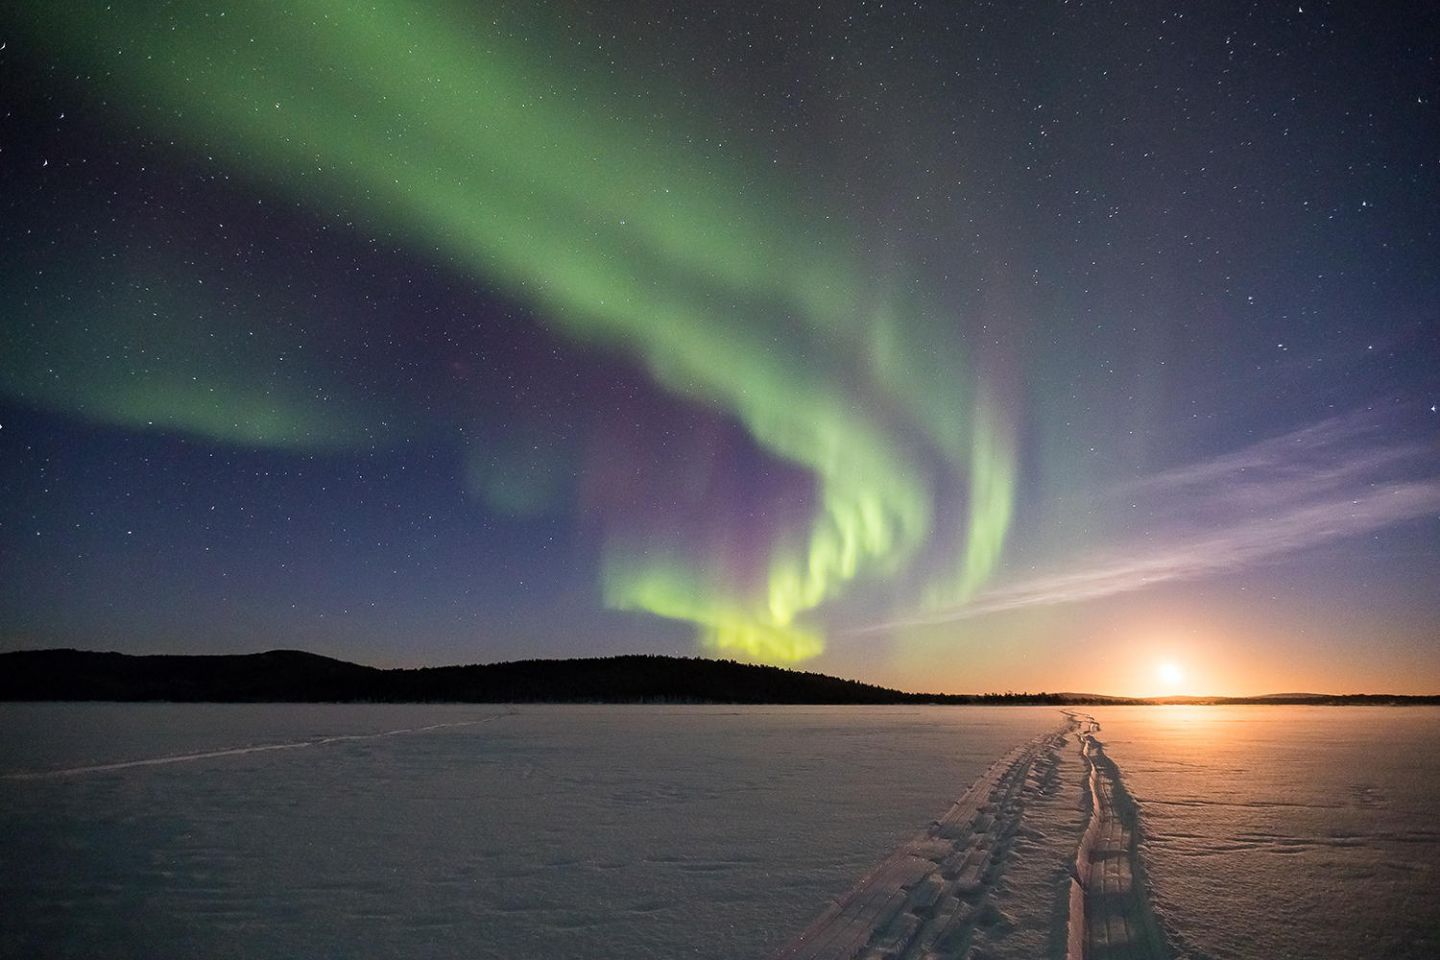 Snowmobile tracks on a frozen lake leading to the rising moon under the Aurora Borealis in northern Finnish Lapland